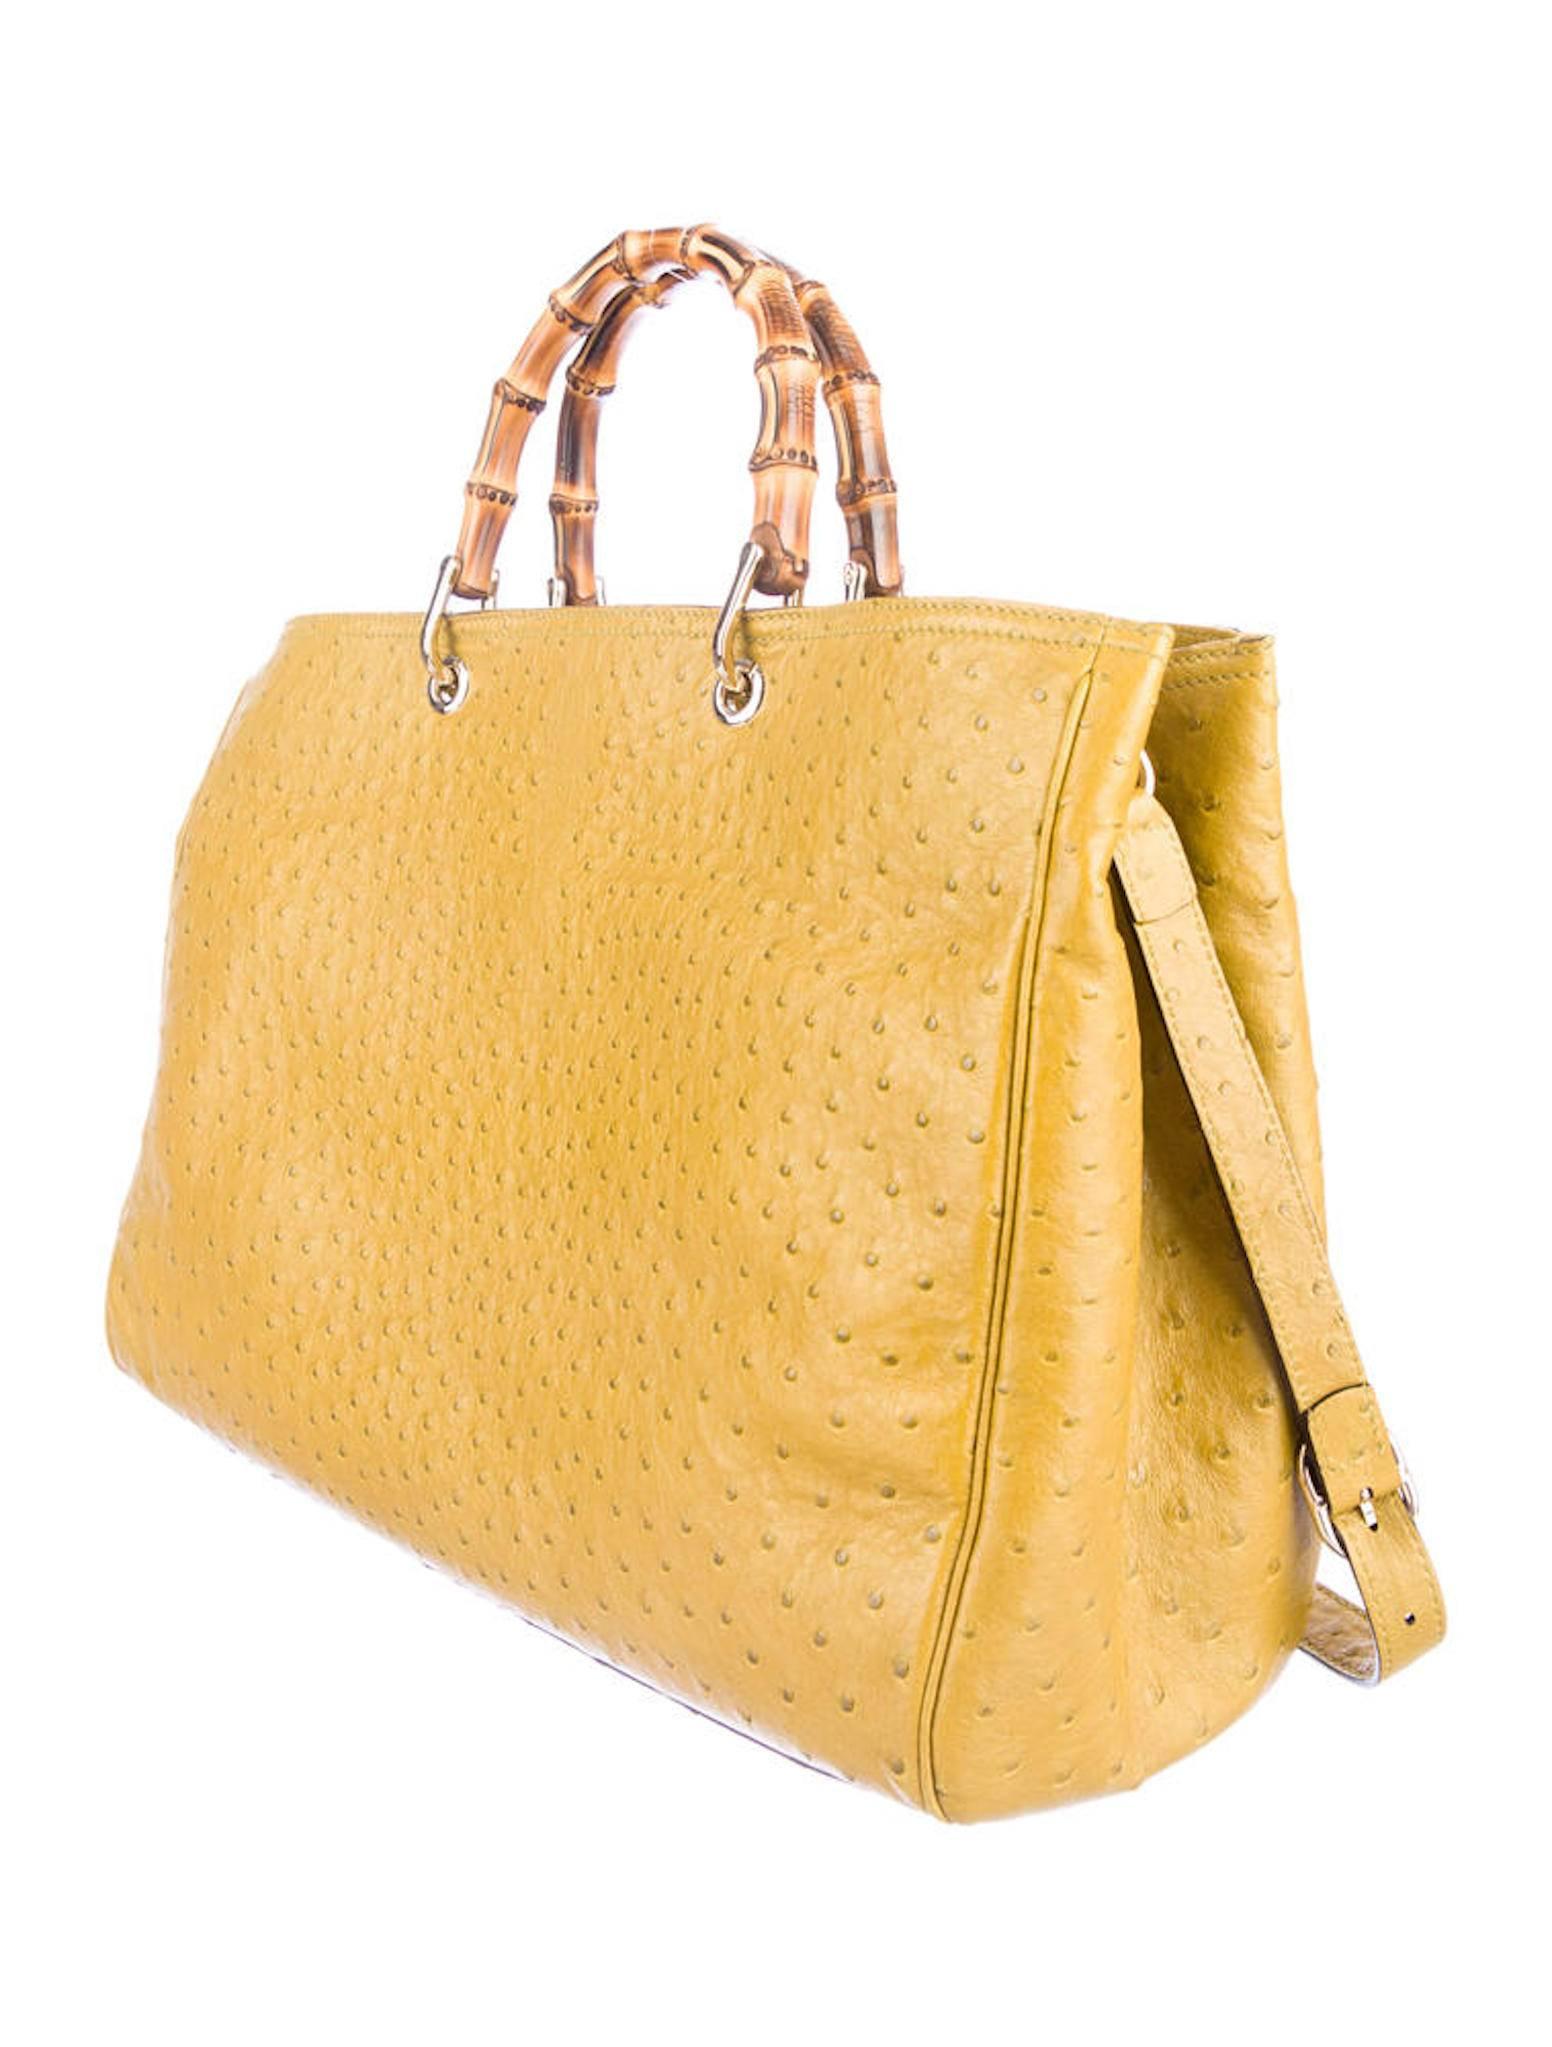 CURATOR'S NOTES

Retail price $9,995
Ostrich leather
Bamboo
Gold tone hardware
Snap closure
Measures 15.5